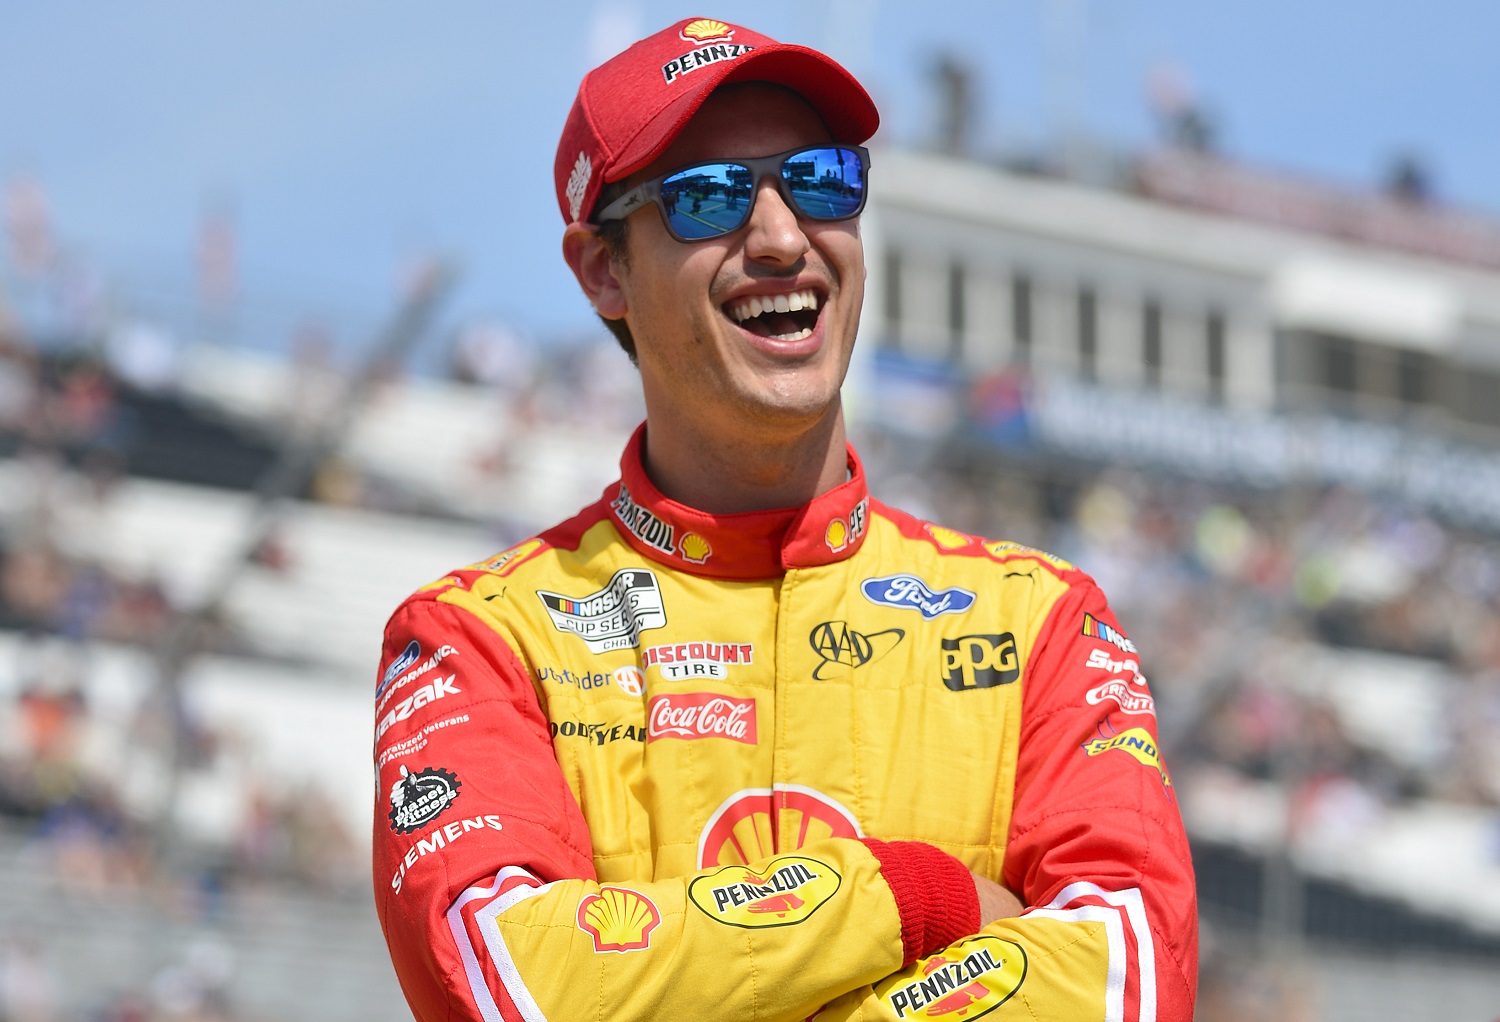 Updated 2022 NASCAR Cup Series Standings Following Joey Logano’s Victory Over the Busch Brothers